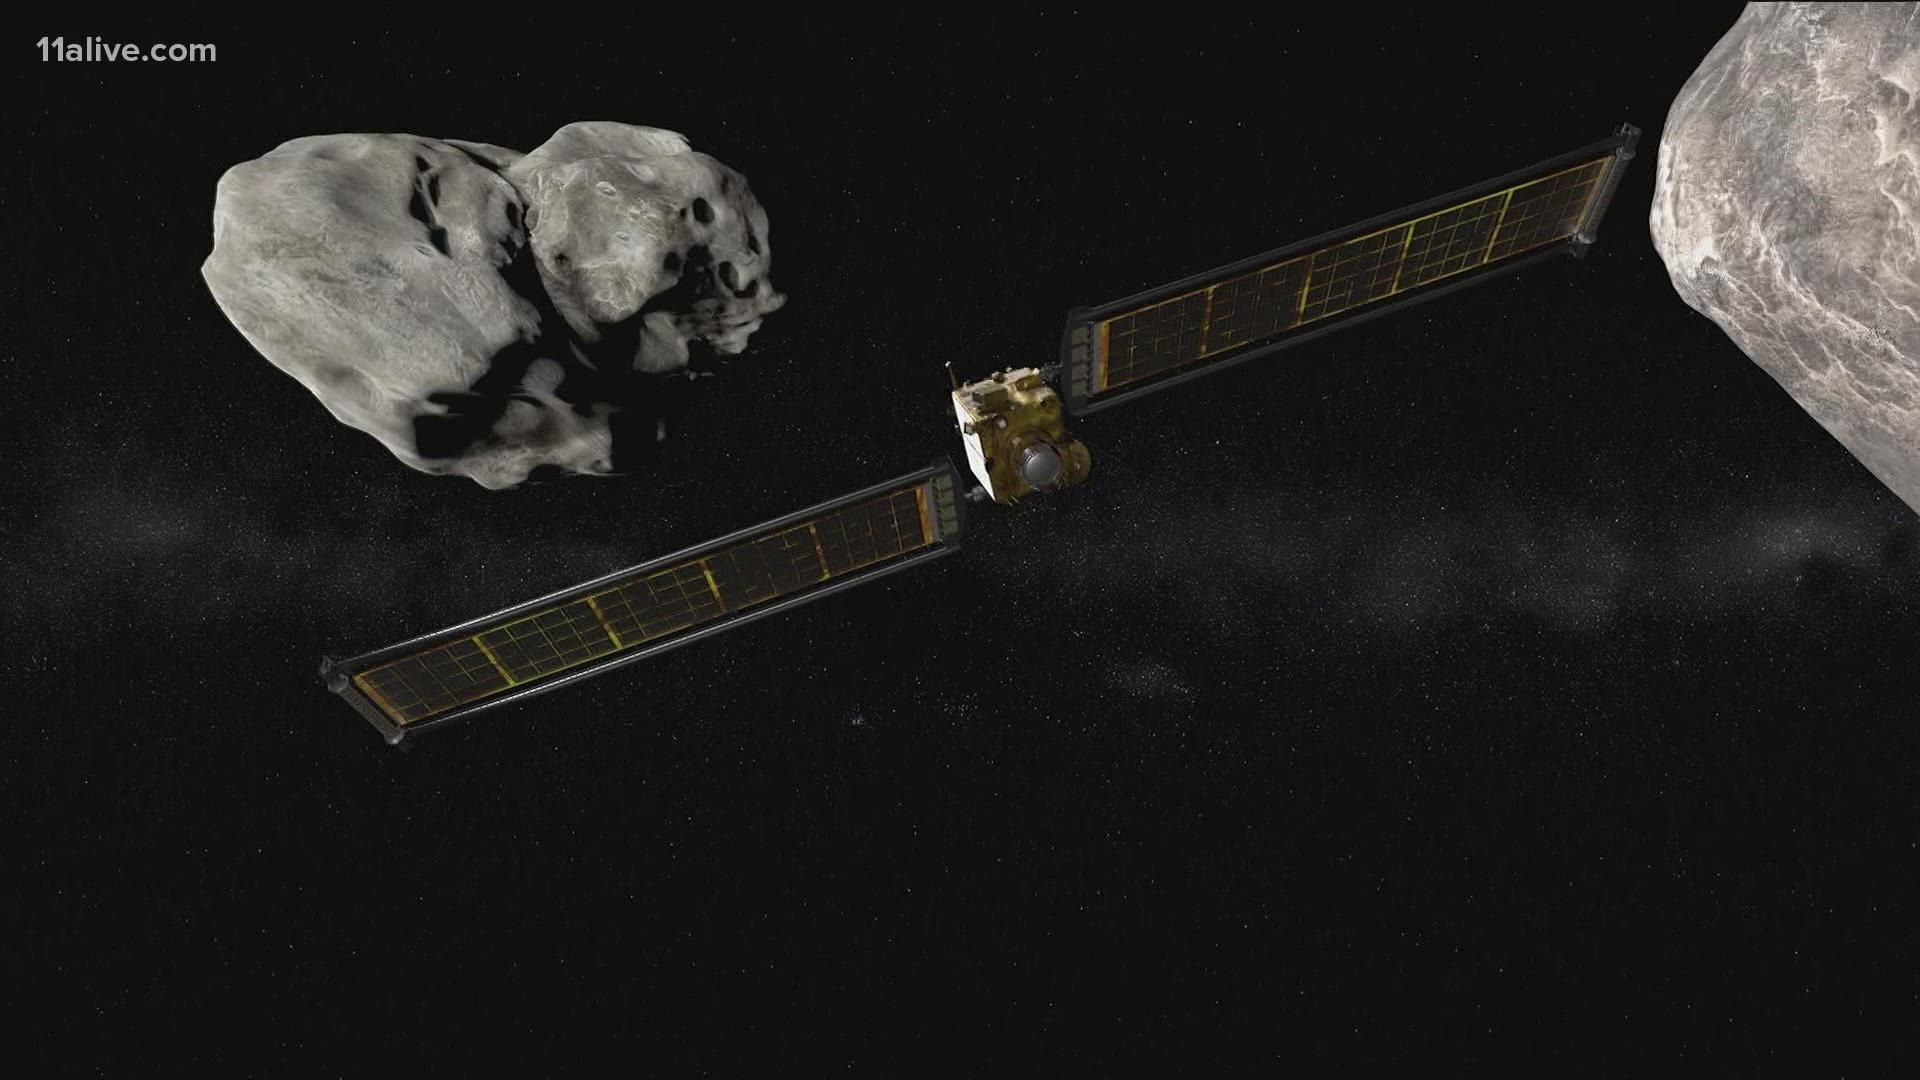 The DART mission will intentionally hit an asteroid to test new Kinetic Impactor Technology for planetary defense.